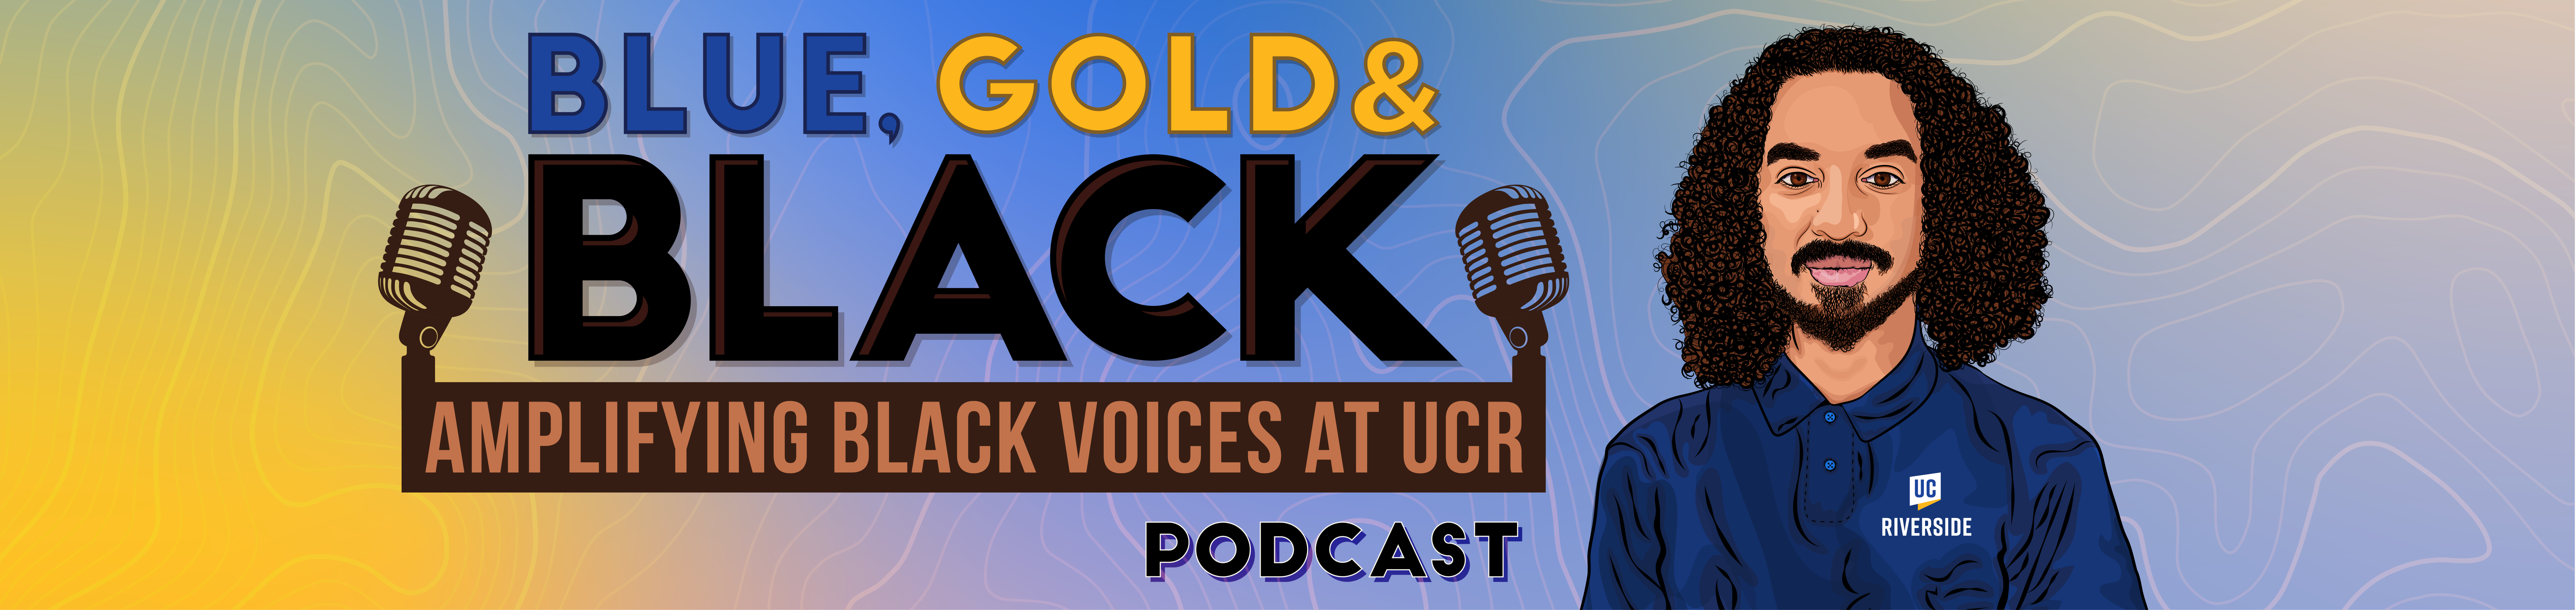 Blue, Gold & BLACK Podcast: Amplifying Black Voices at UCR